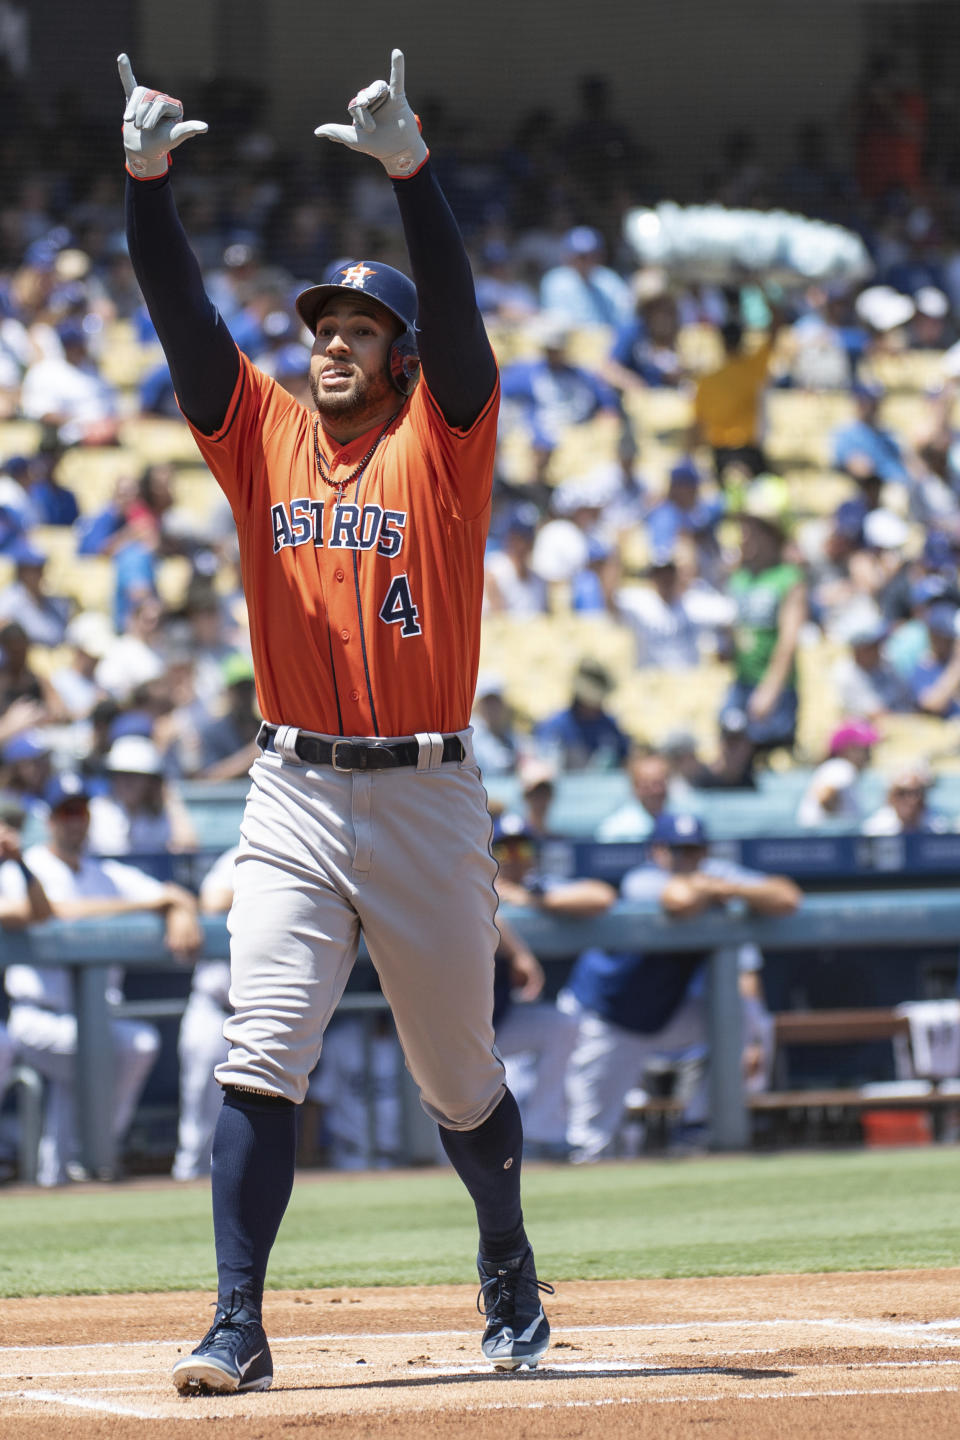 Houston Astros' George Springer celebrates his solo home run during the first inning of a baseball game against the Los Angeles Dodgers in Los Angeles, Sunday, Aug. 5, 2018. (AP Photo/Kyusung Gong)